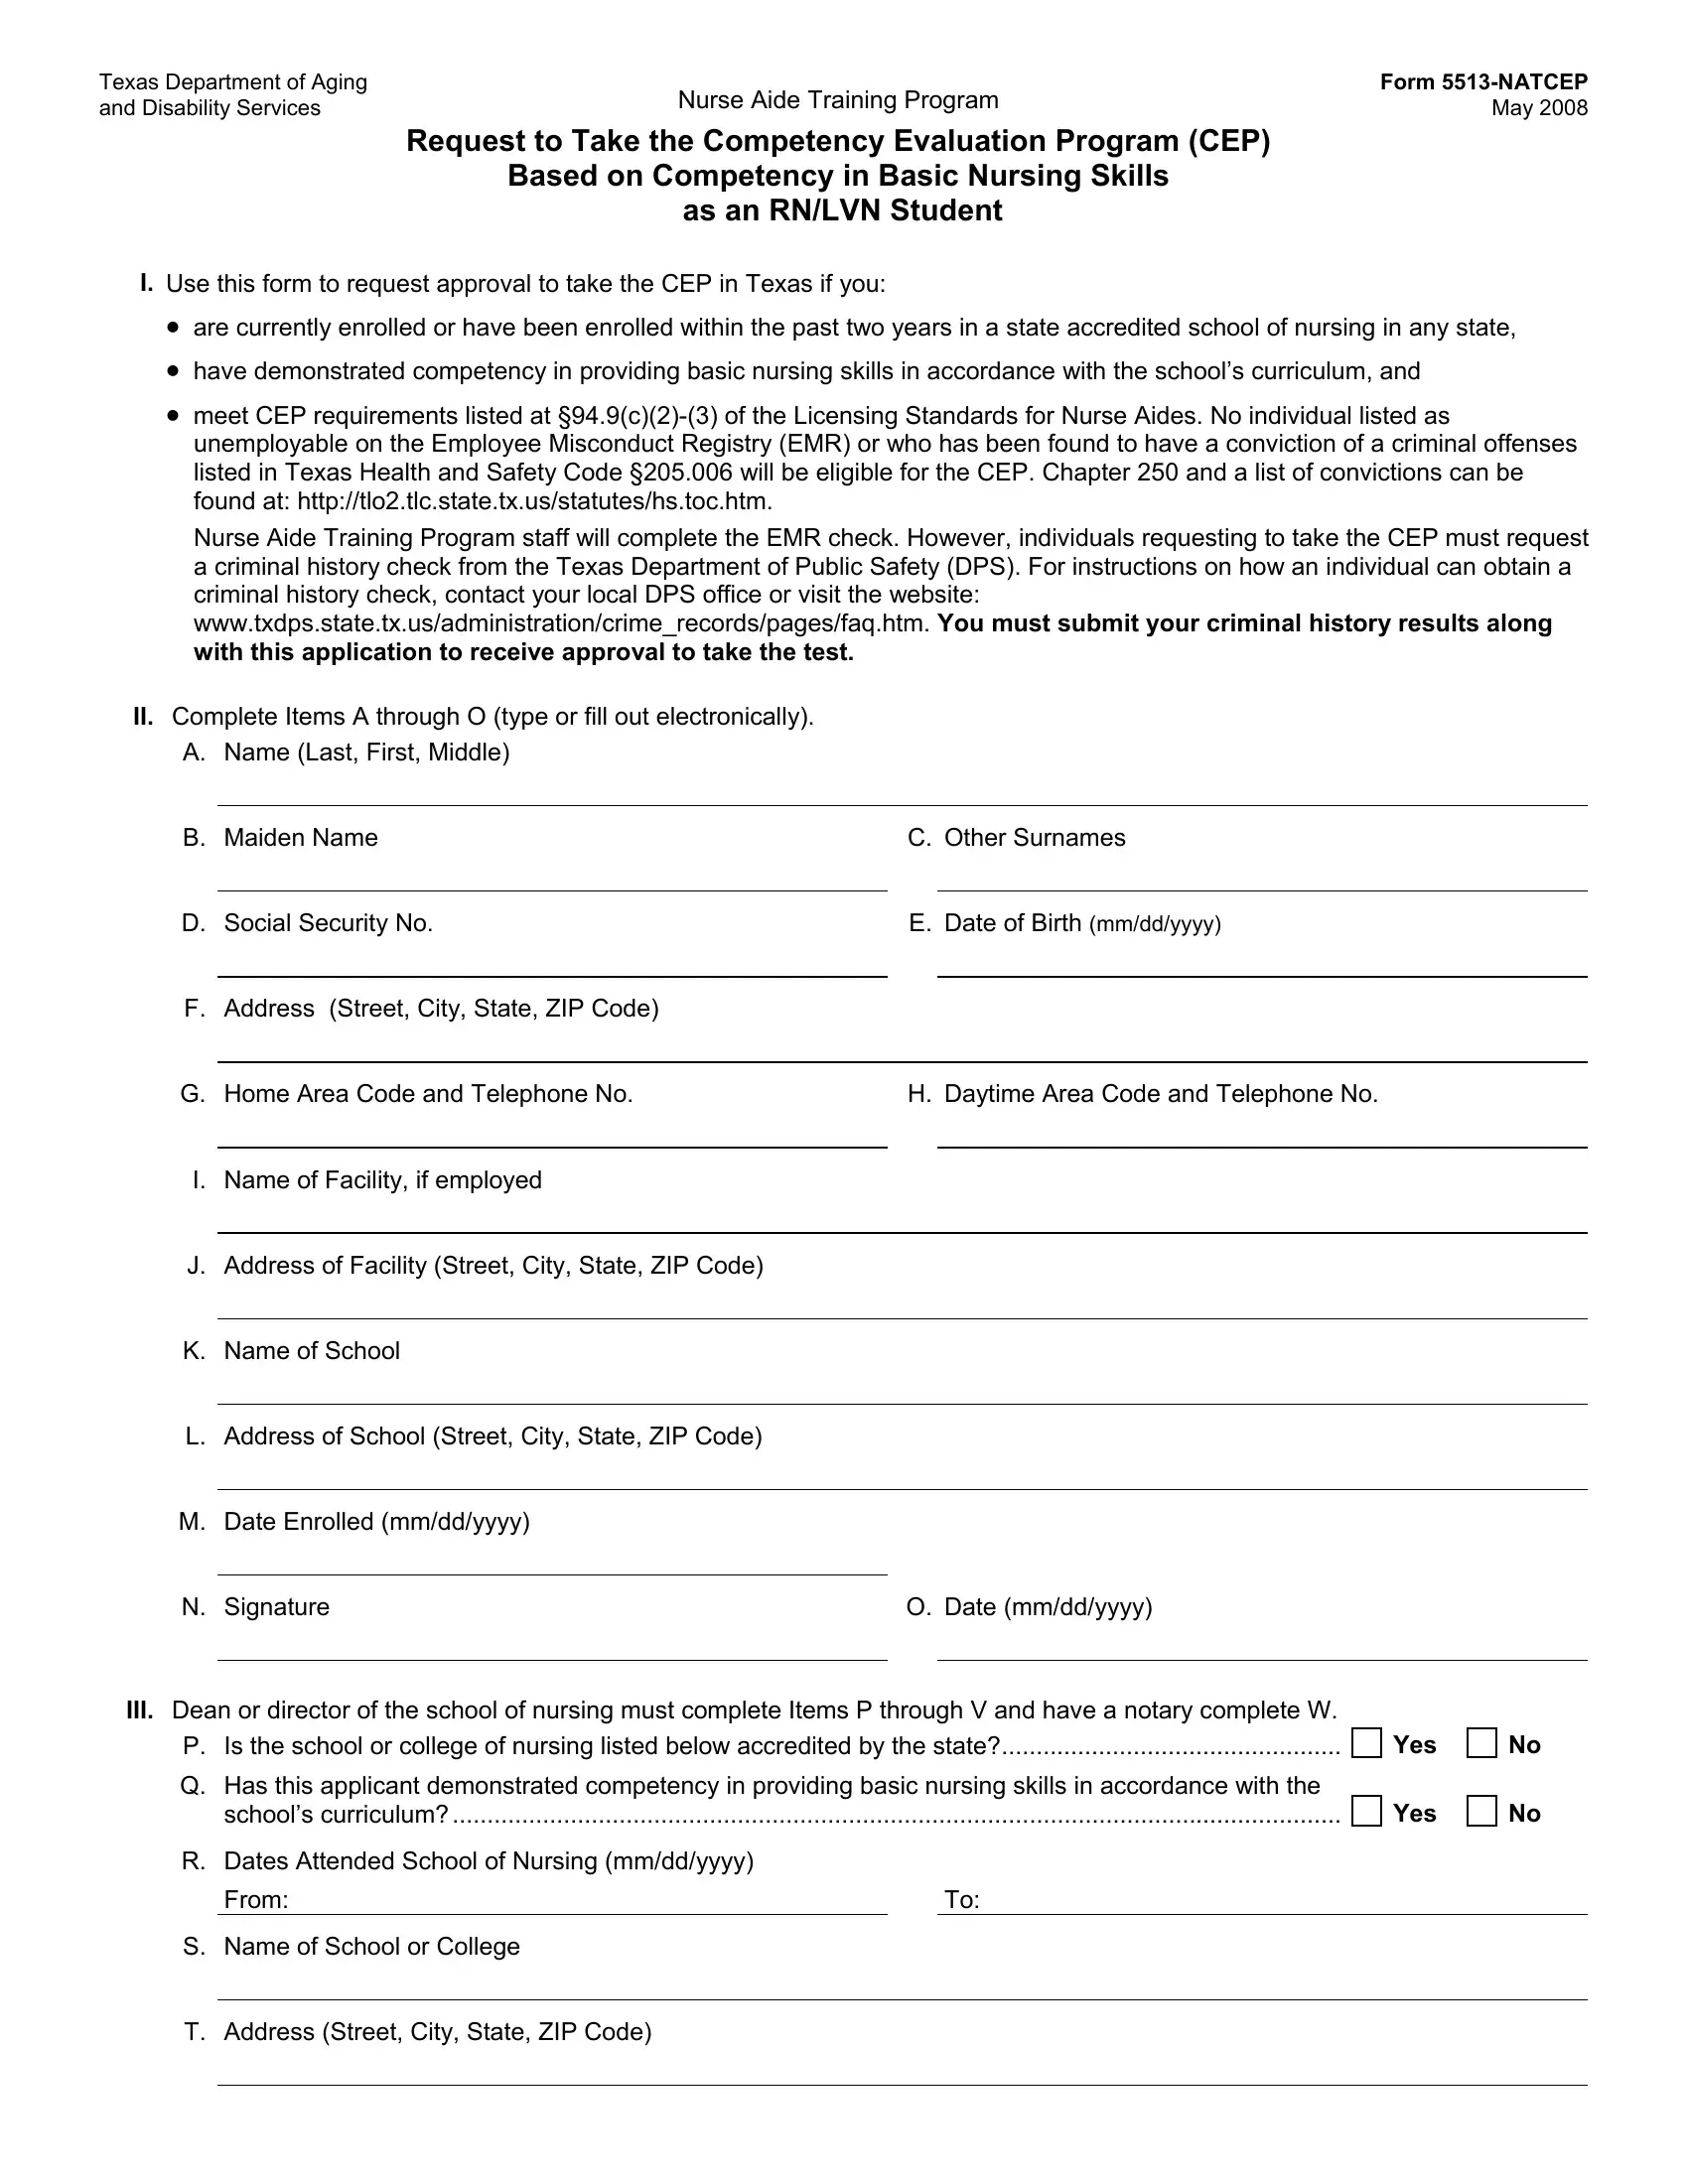 Form 5513 Natcep Preview